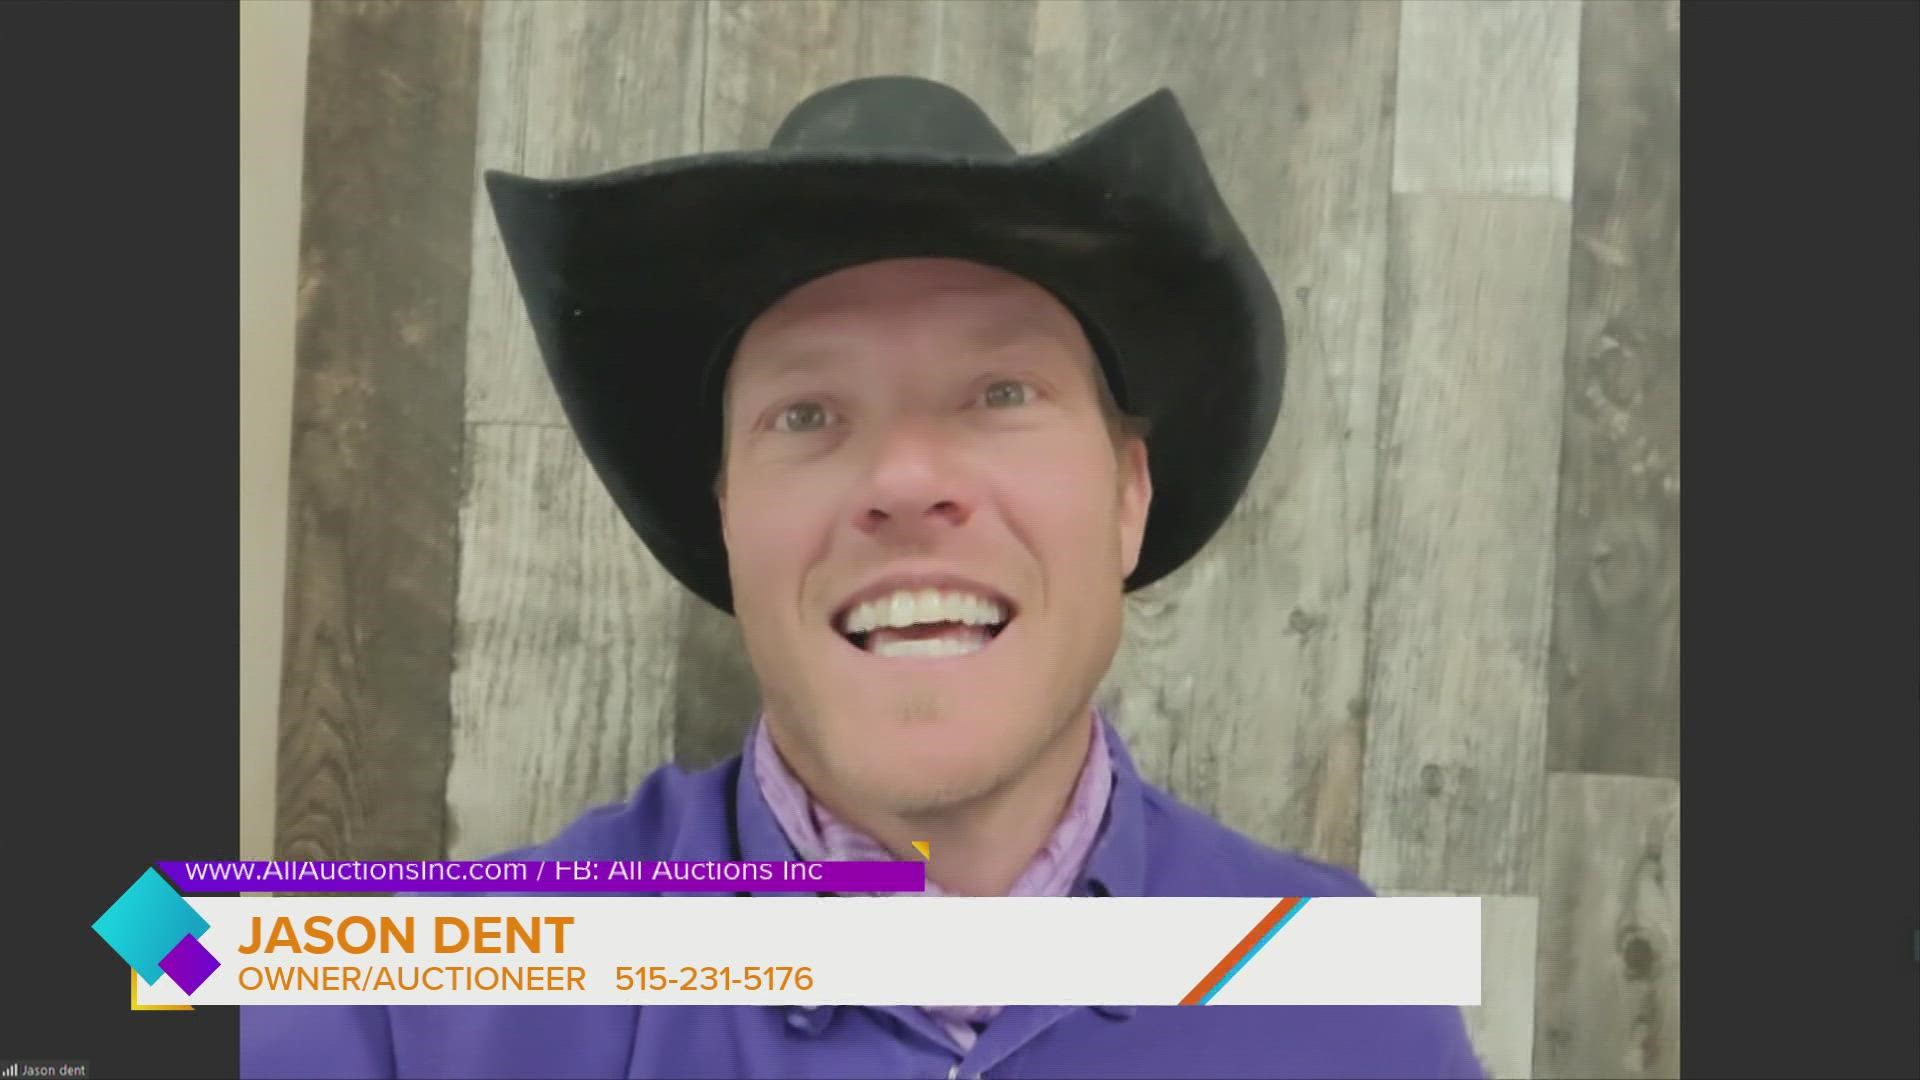 Jason Dent, Owner/Auctioneer-All Auctions Inc talks about HUGE auctions that will be happening the NEXT THREE SATURDAYS (4/30, 5/7 & 5/14) in Iowa. | Paid Content